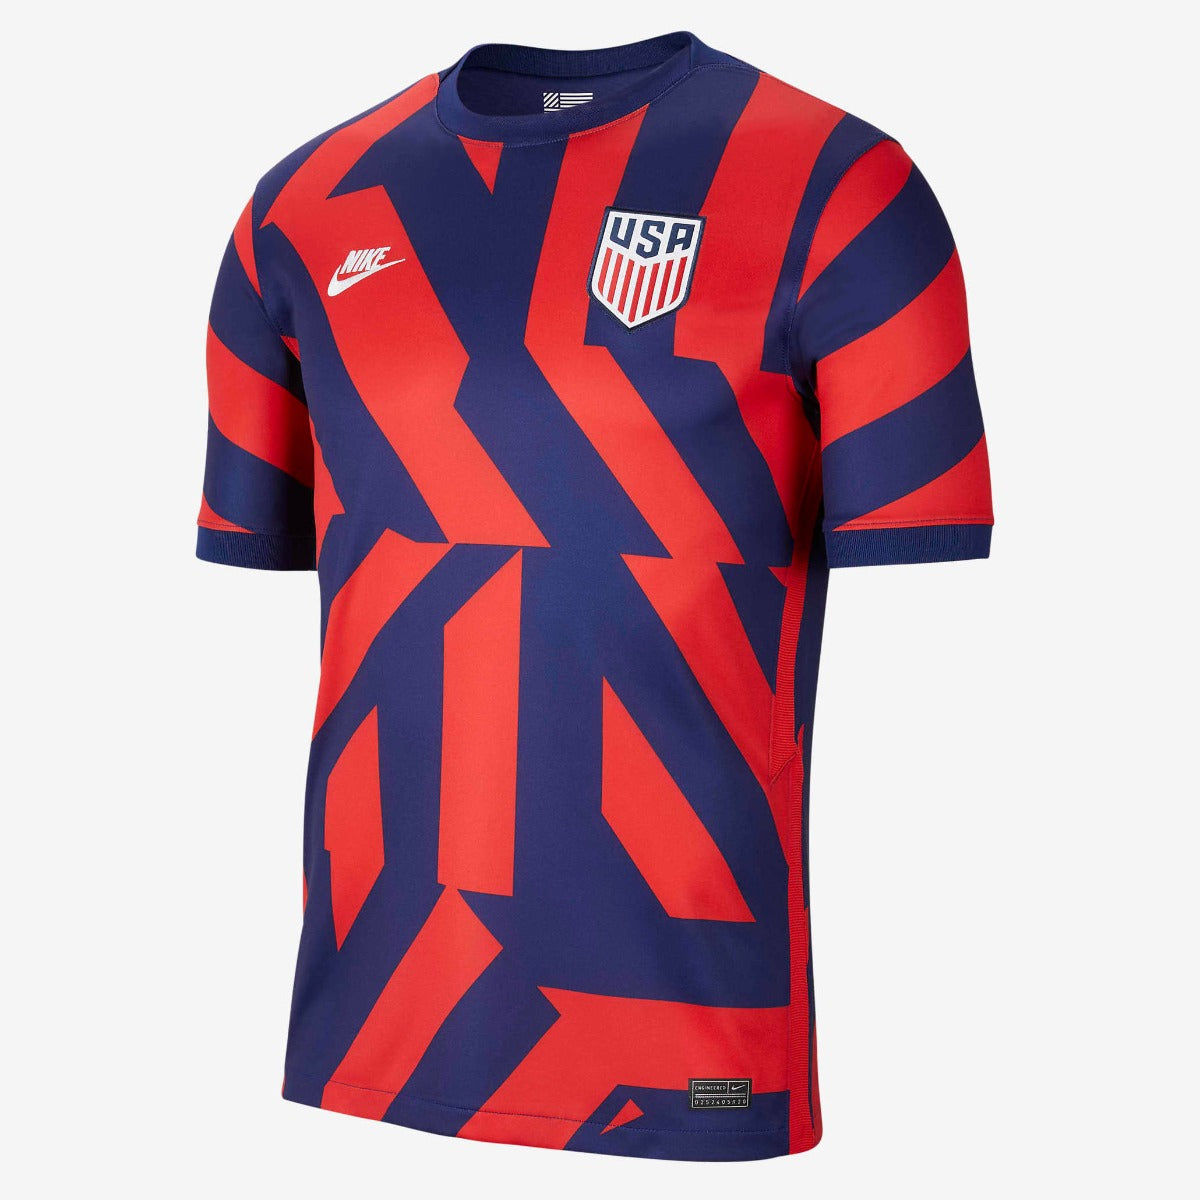 Nike 2021-22 USA Away jersey - Navy-Red (Front)